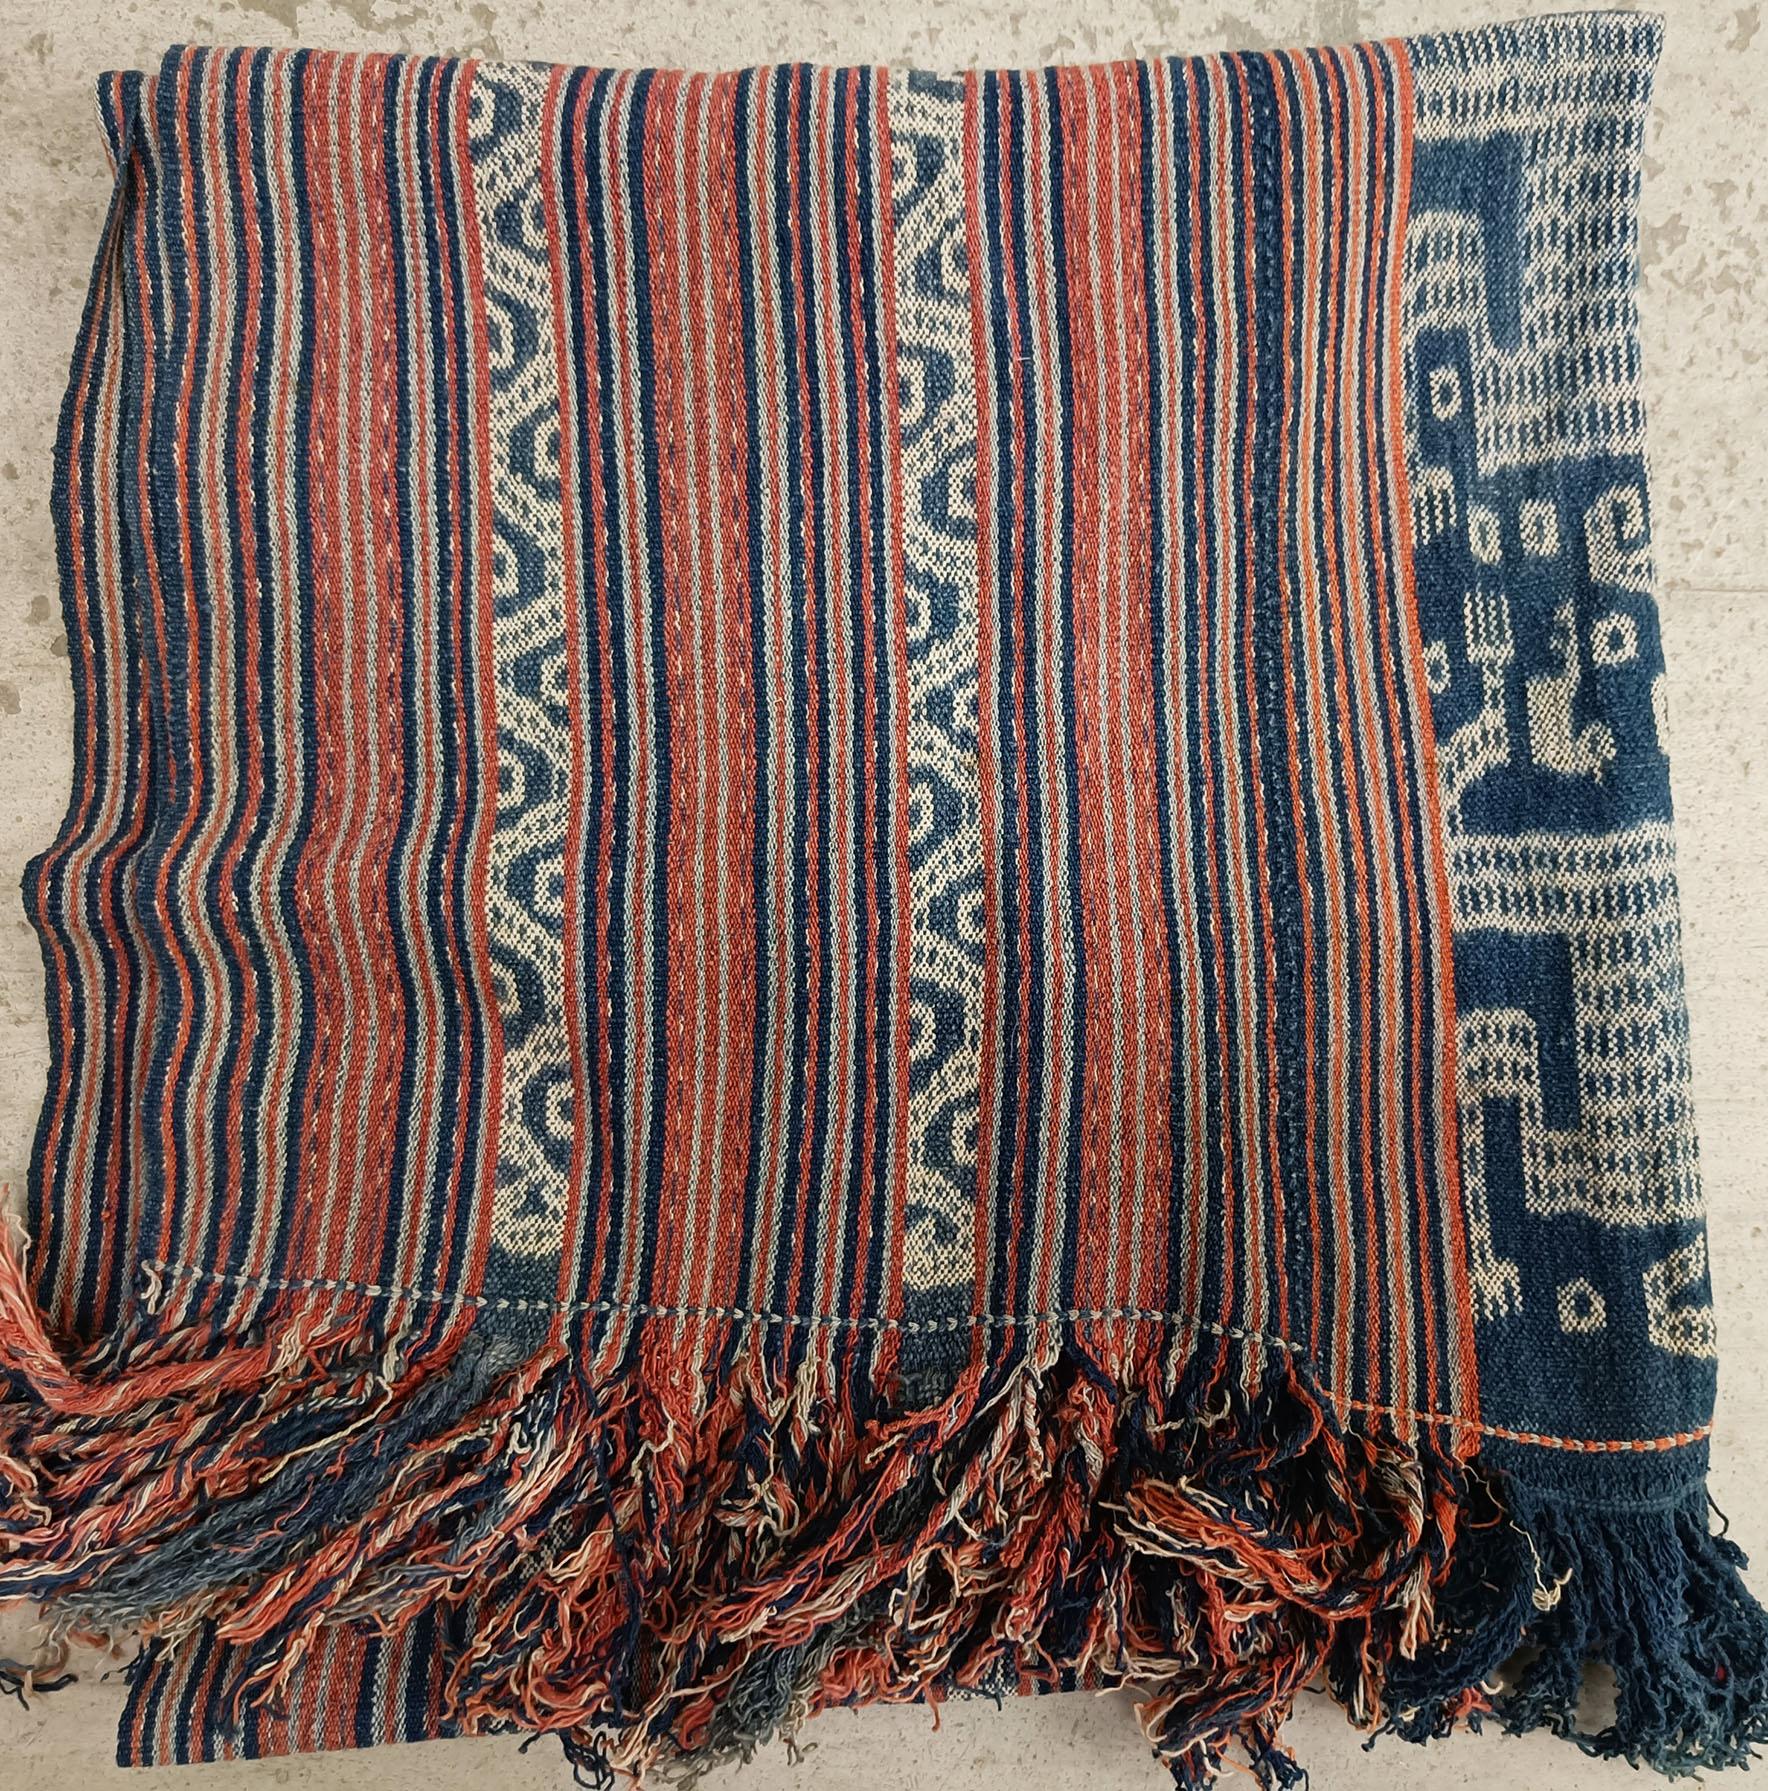 20th Century Vintage Ikat Cloth Timor Indonesia Asian Textiles Home Decor For Sale